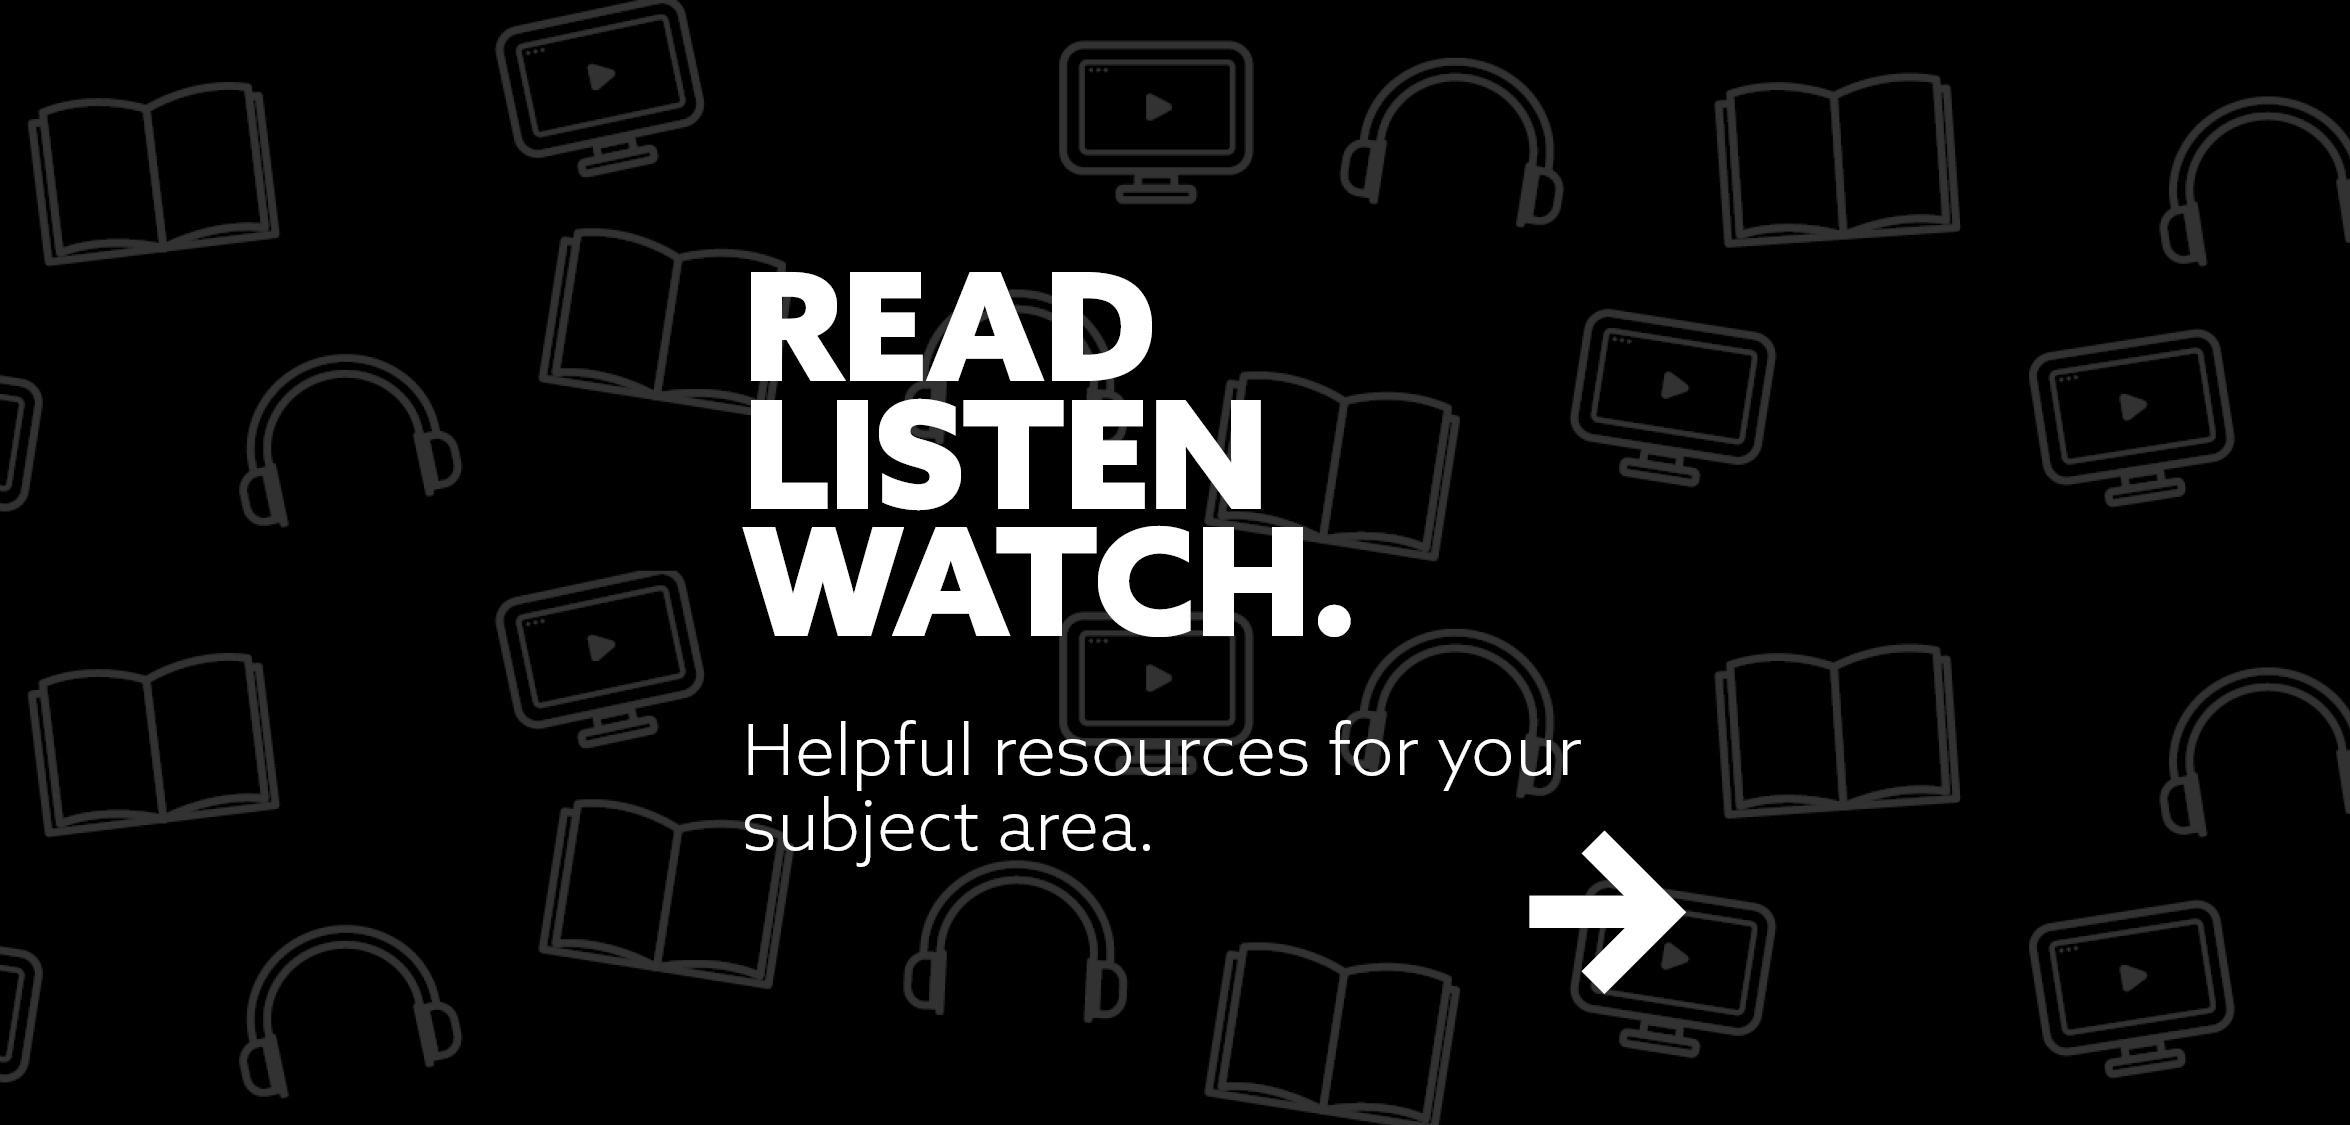 Read, listen, watch. Helpful resources for your subject area